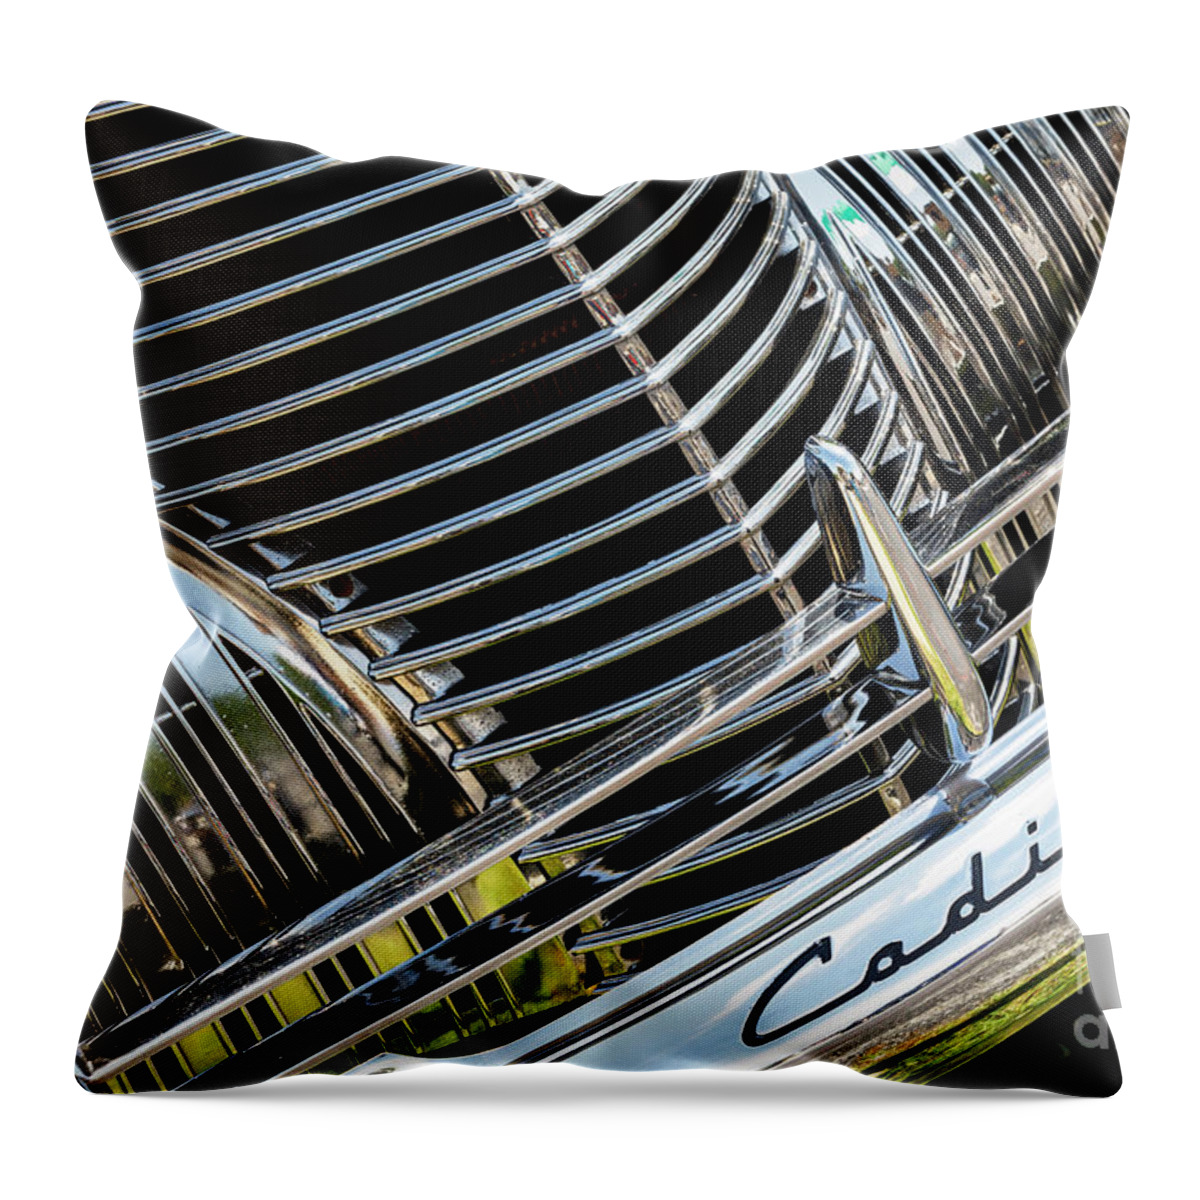 Cadillac Throw Pillow featuring the photograph Cadi Grill by Dennis Hedberg